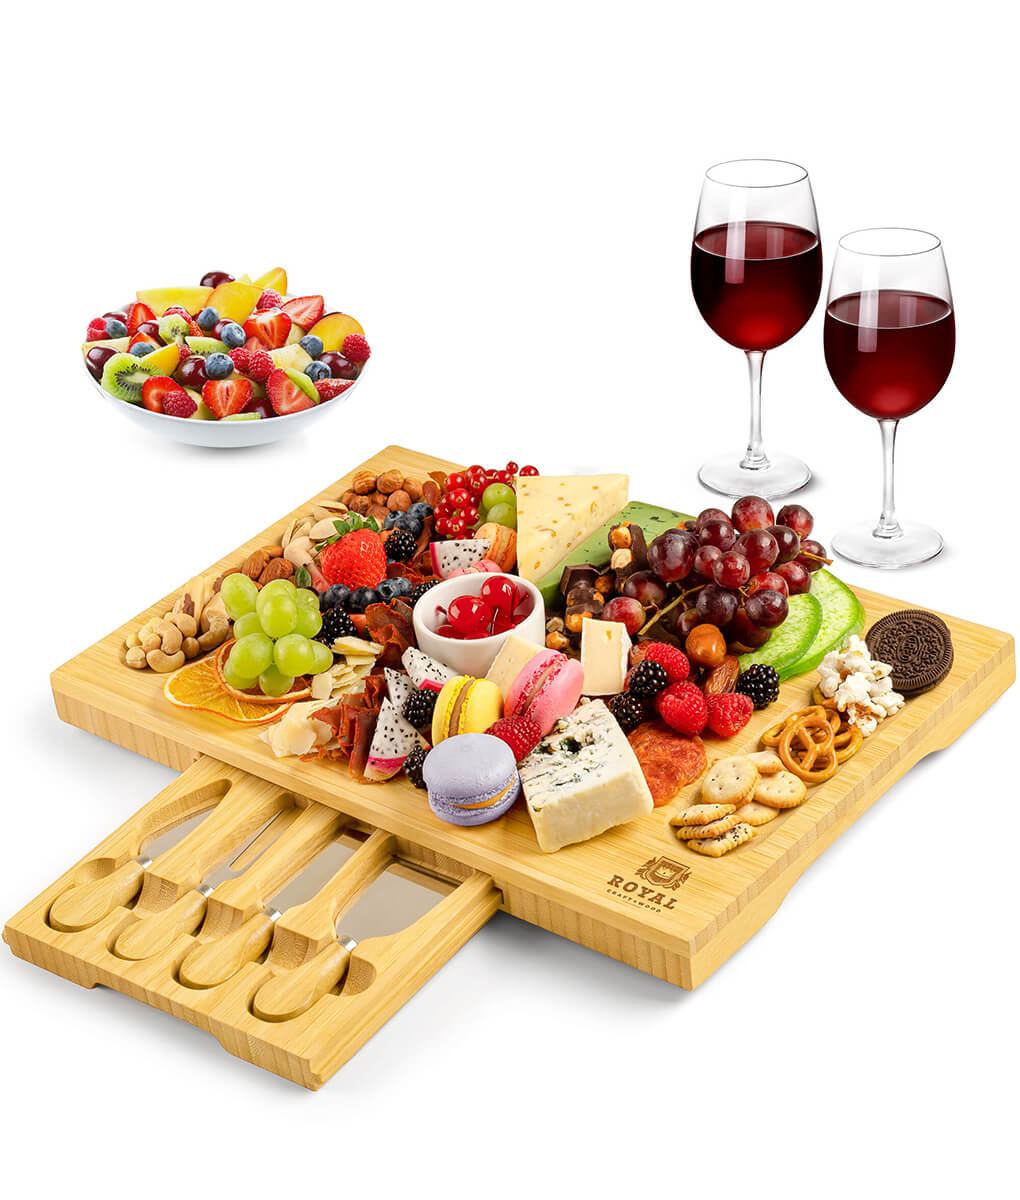 Cheese and Cracker Tray with Slate Plate by Royal Craft Wood